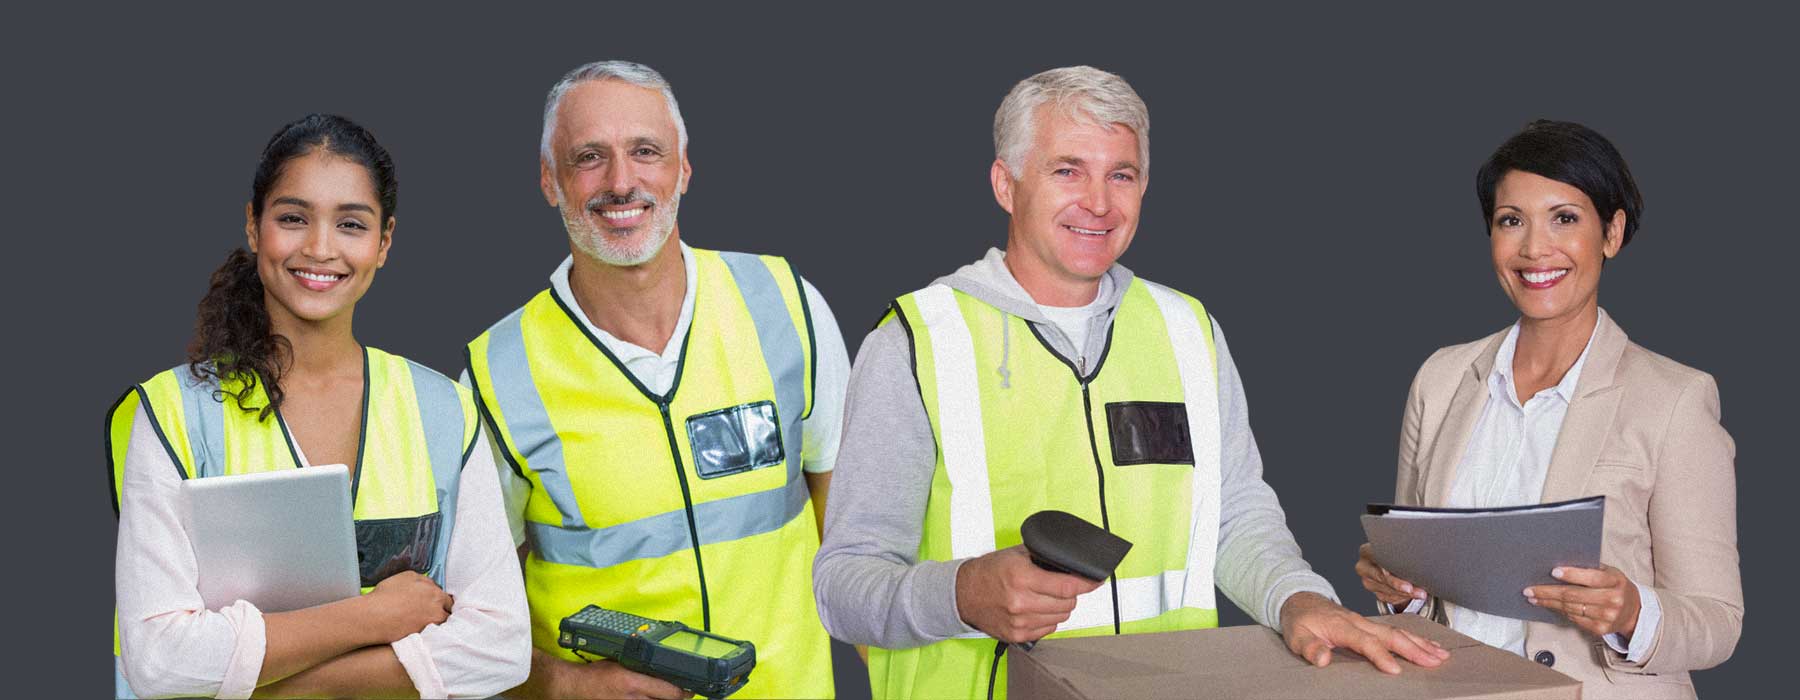 Staffing your warehouse needs